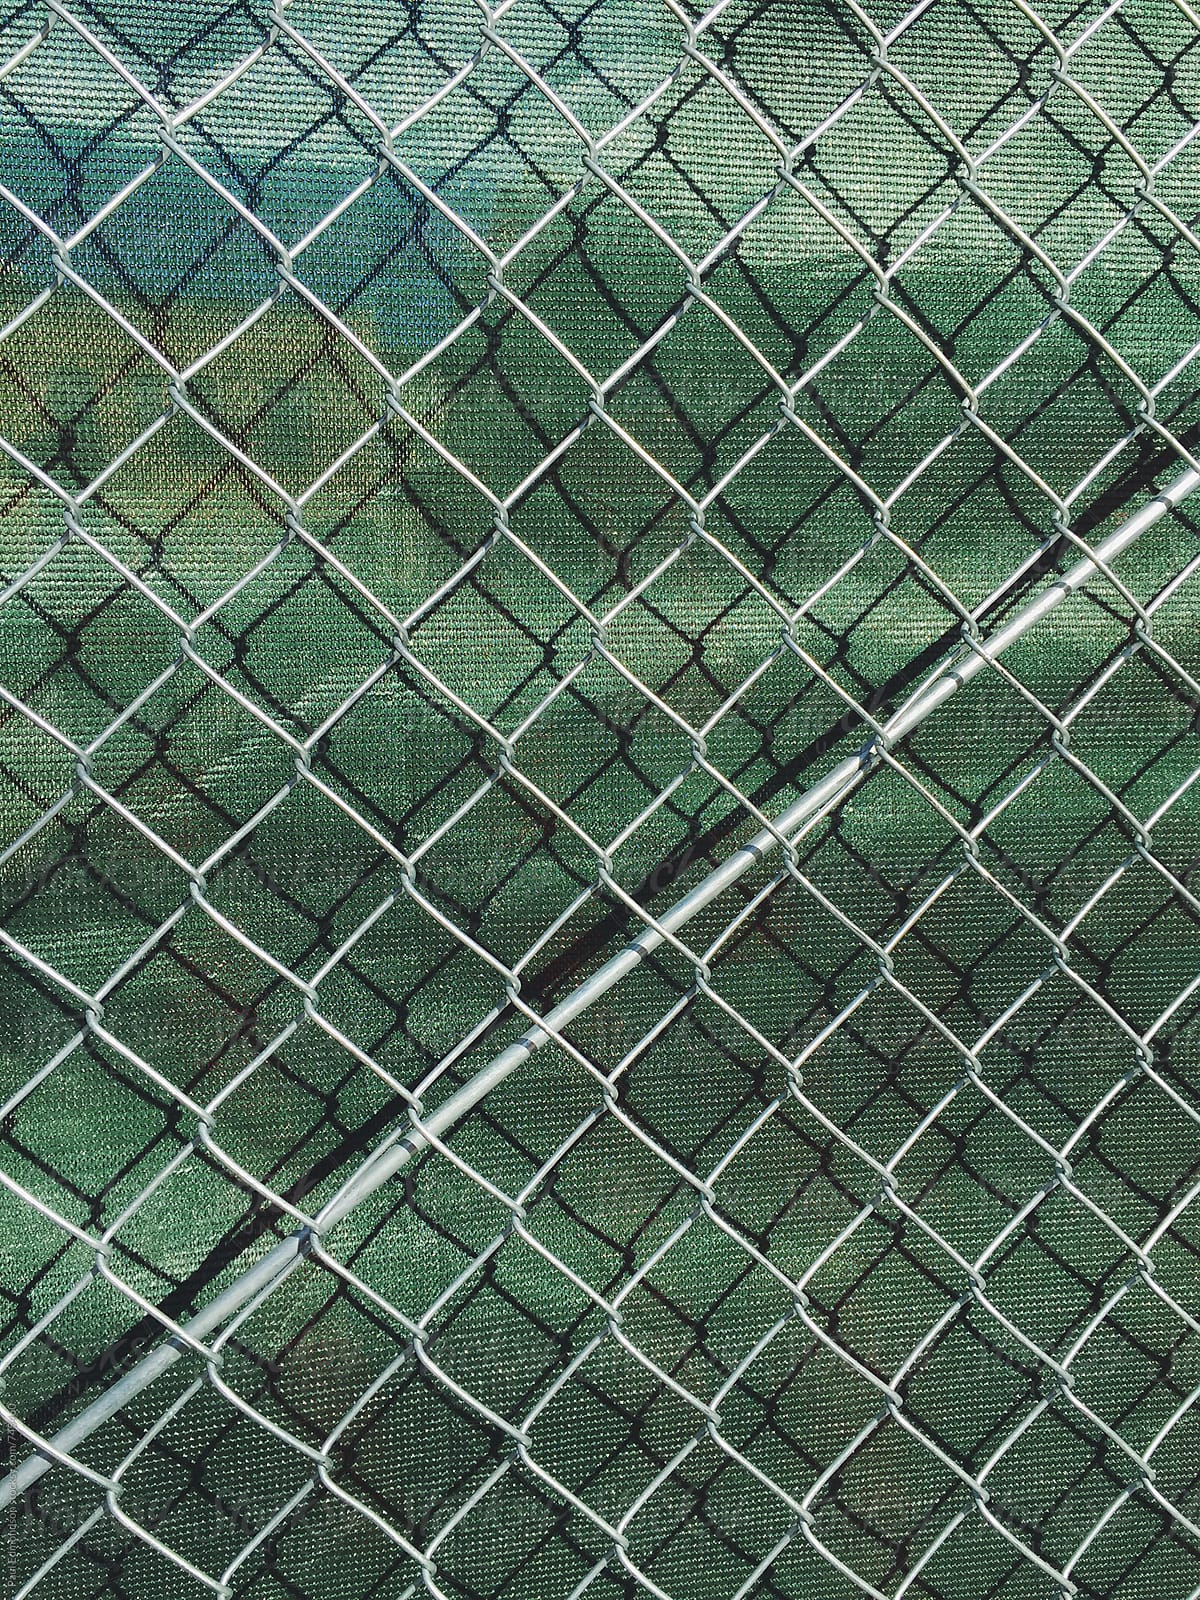 Detail of chain link fence and green fabric at construction site